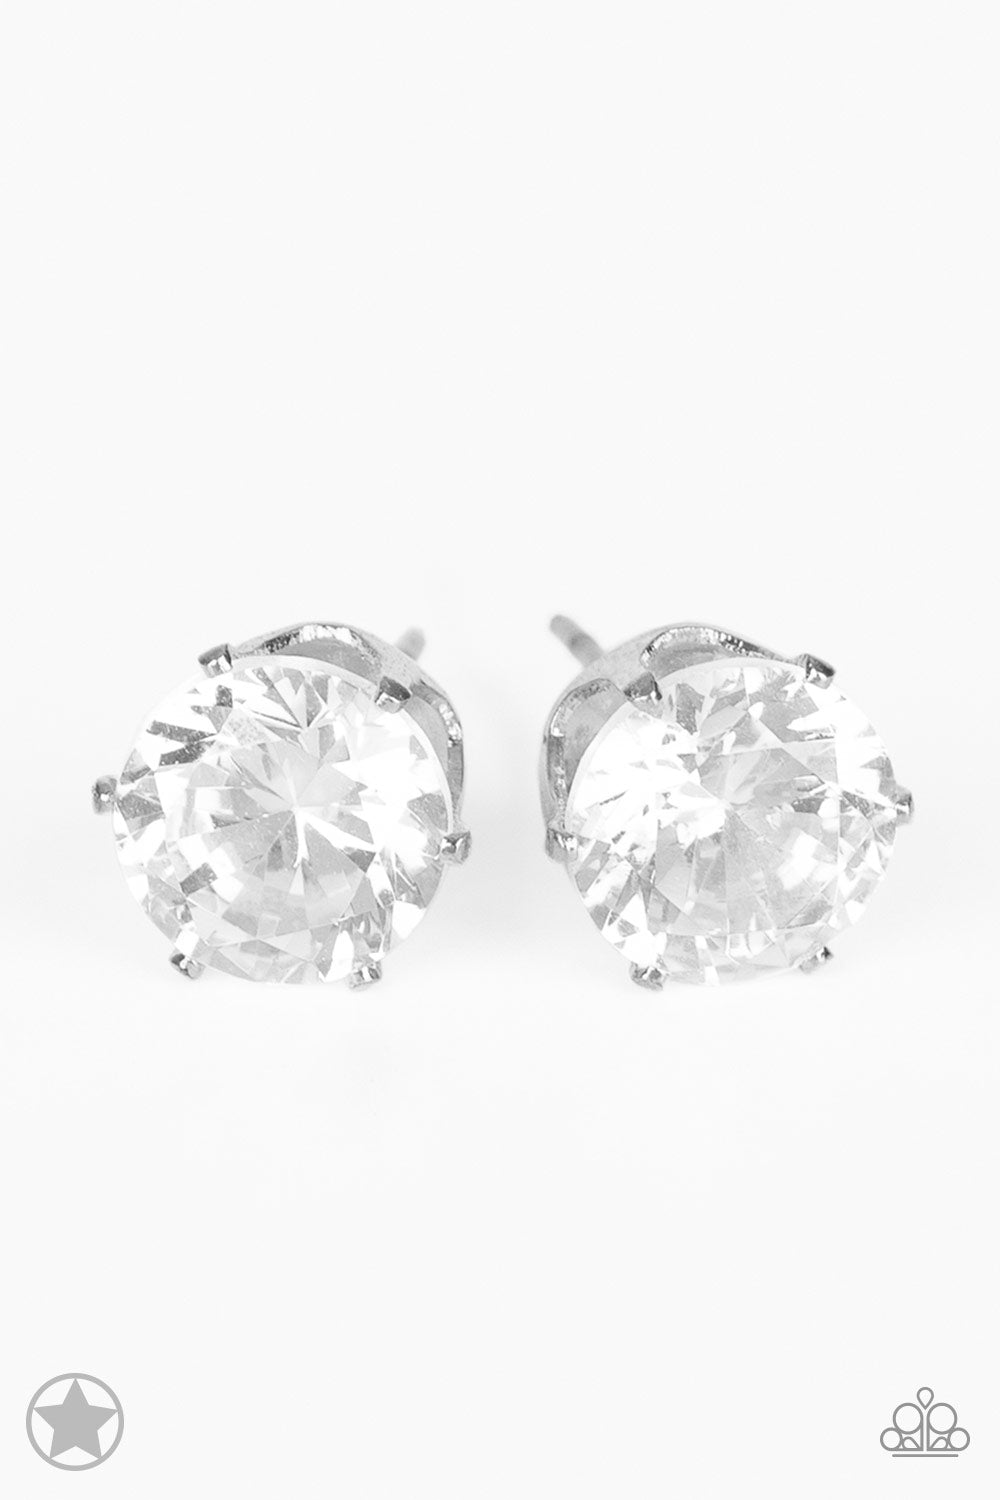 JUST IN TIMELESS - WHITE  CLEAR CRYSTAL RHINESTONE POST EARRINGS